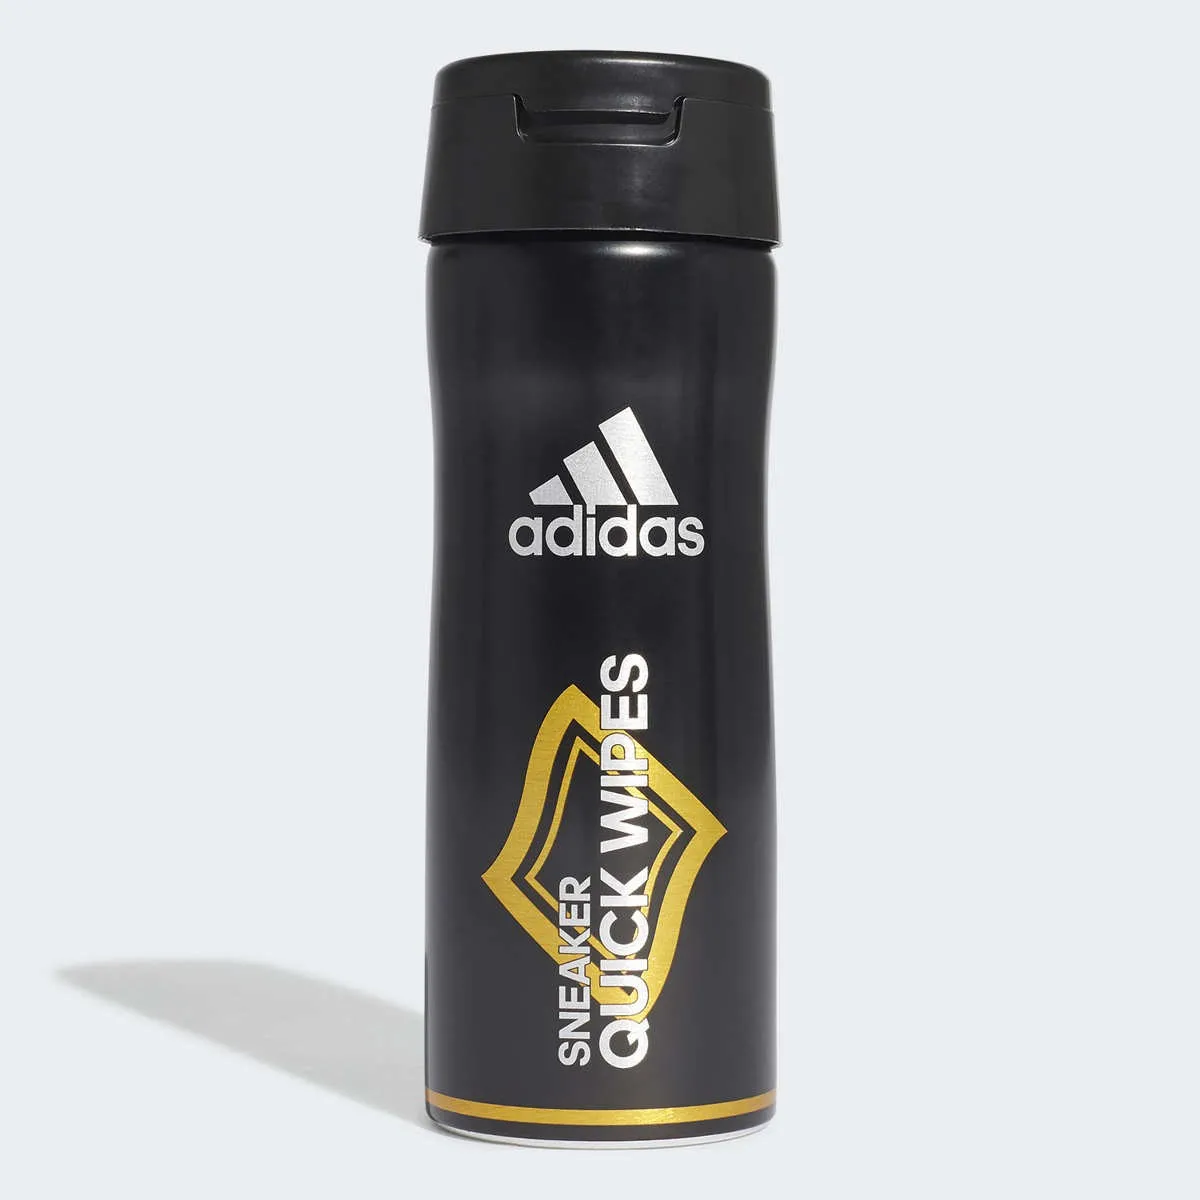 adidas sneaker wet wipes Cleaning wipes